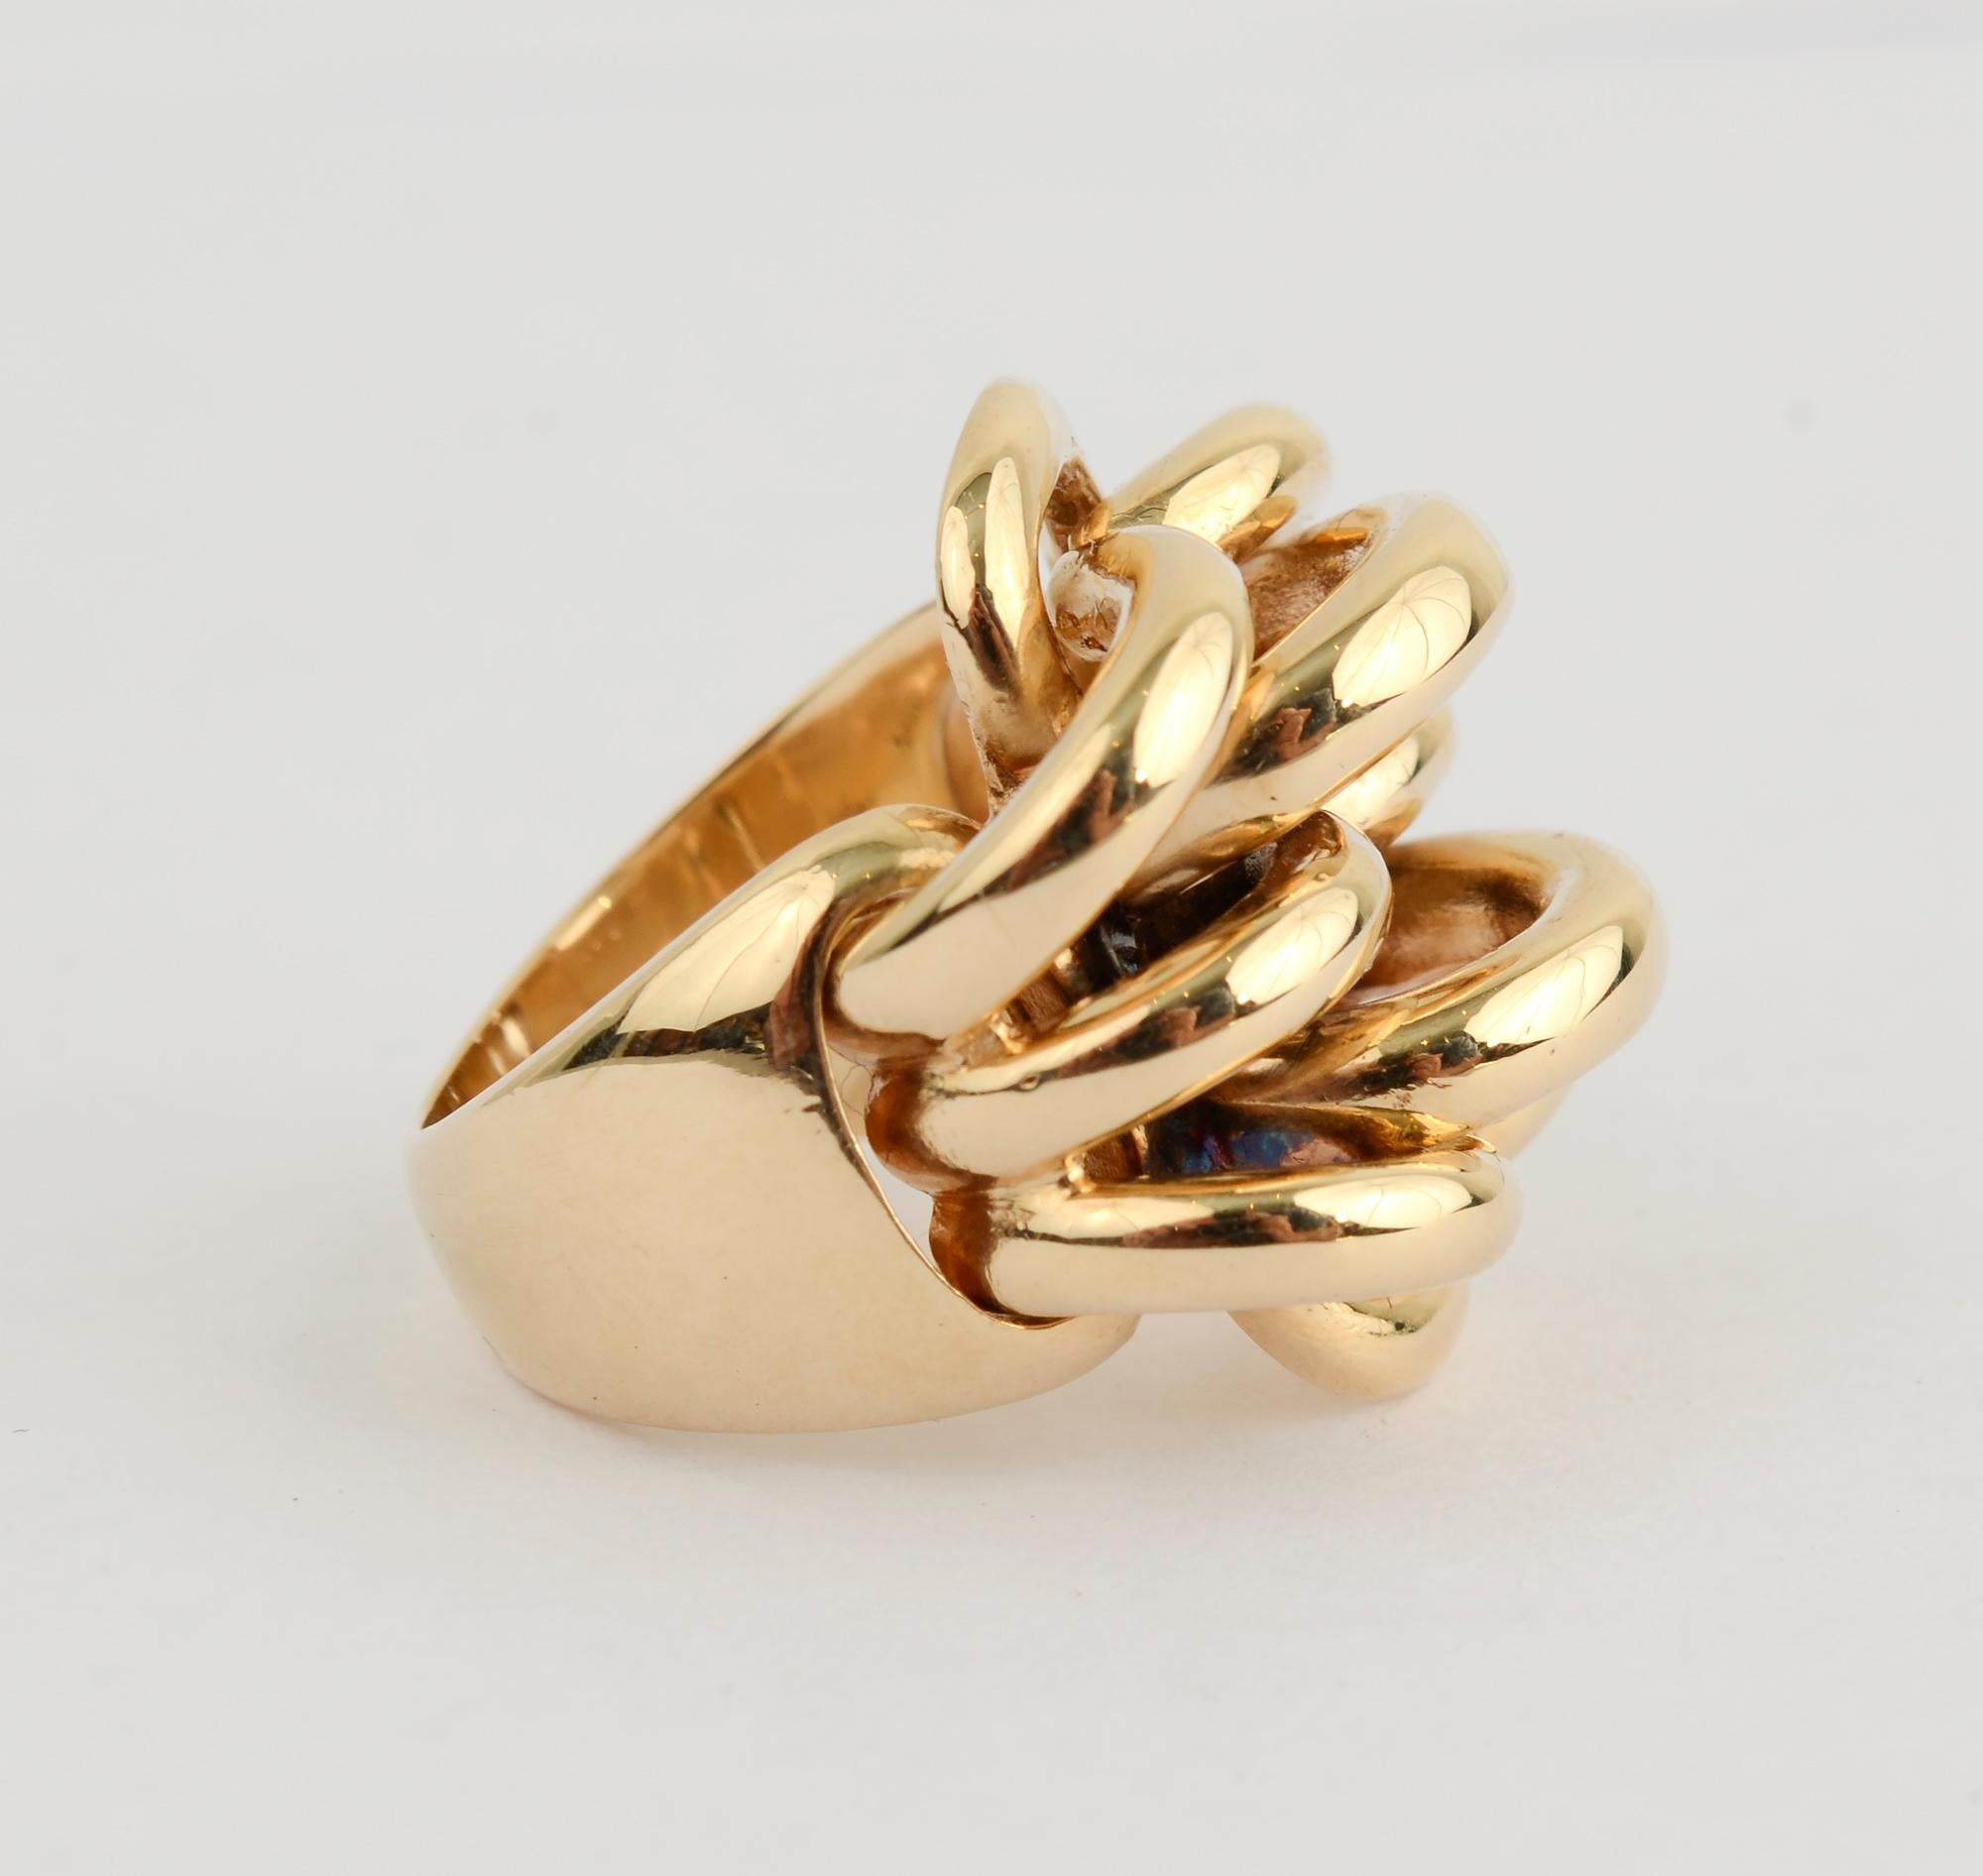 Stylish, unusual ring by Cartier consisting of five rows of arched bands of gold. The arches are of alternating heights.
The ring is size 5. It can easily be sized up or down.